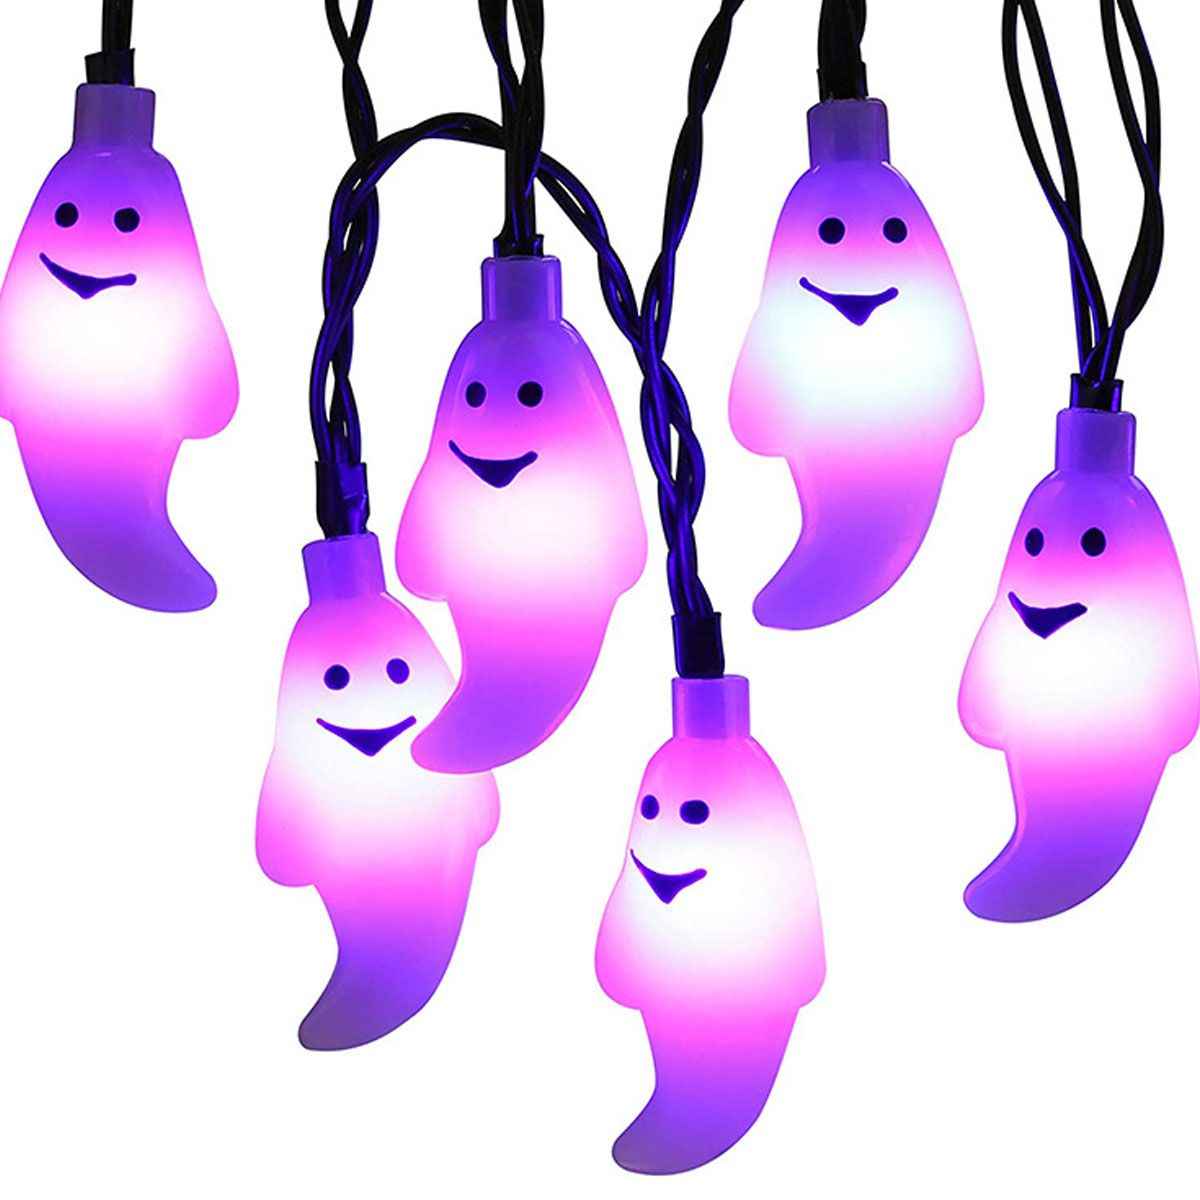 65M-30-LED-Ball-Solar-Halloween-Party-Fairy-Outdoor-String-Lights-for-Patio-Garden-8-Mode-Adjustment-1741092-12